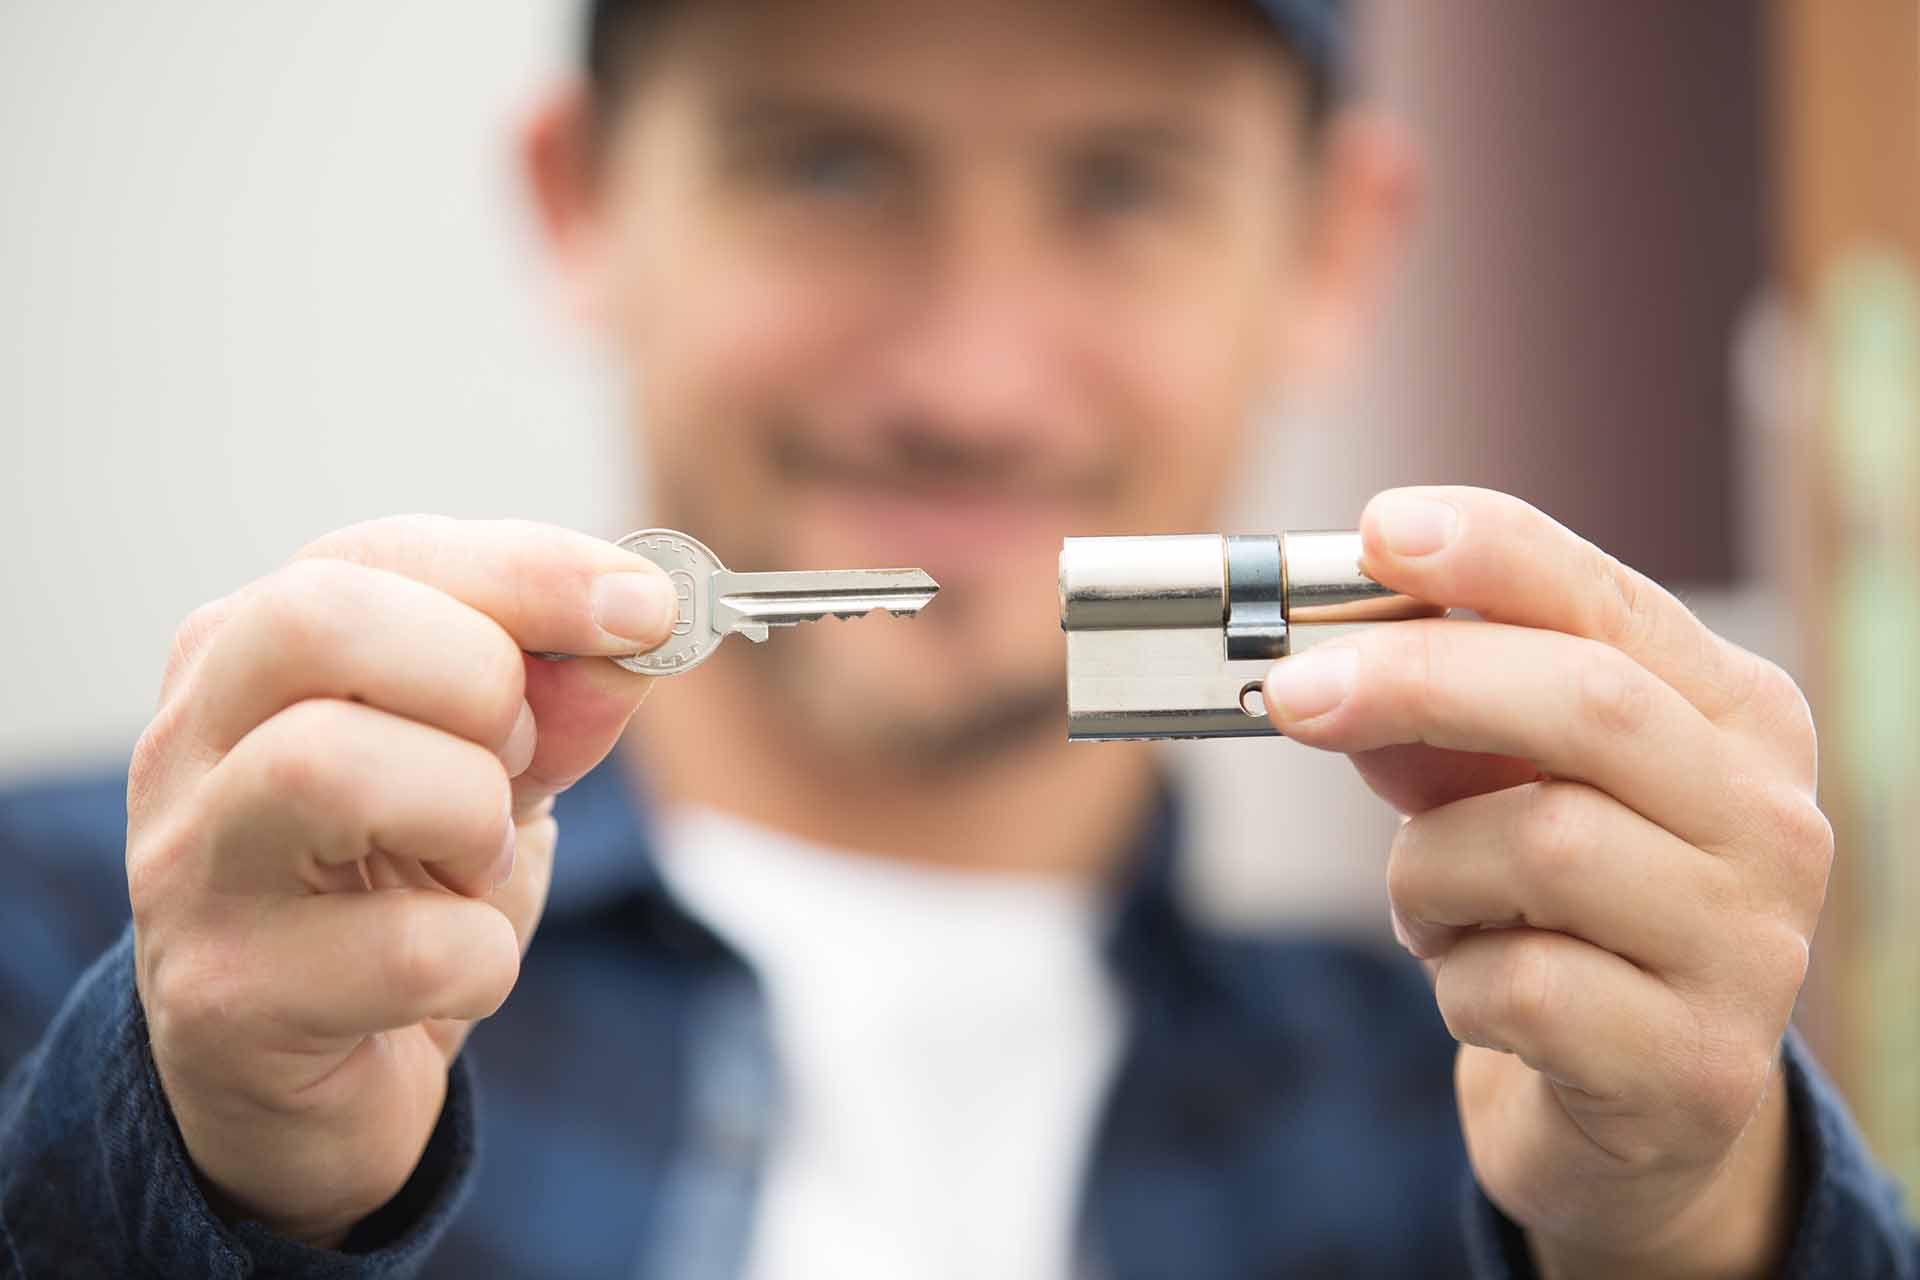 Locksmith Services in Deerfield Beach: Everything You Need to Know for Residential, Commercial, and Automotive Security